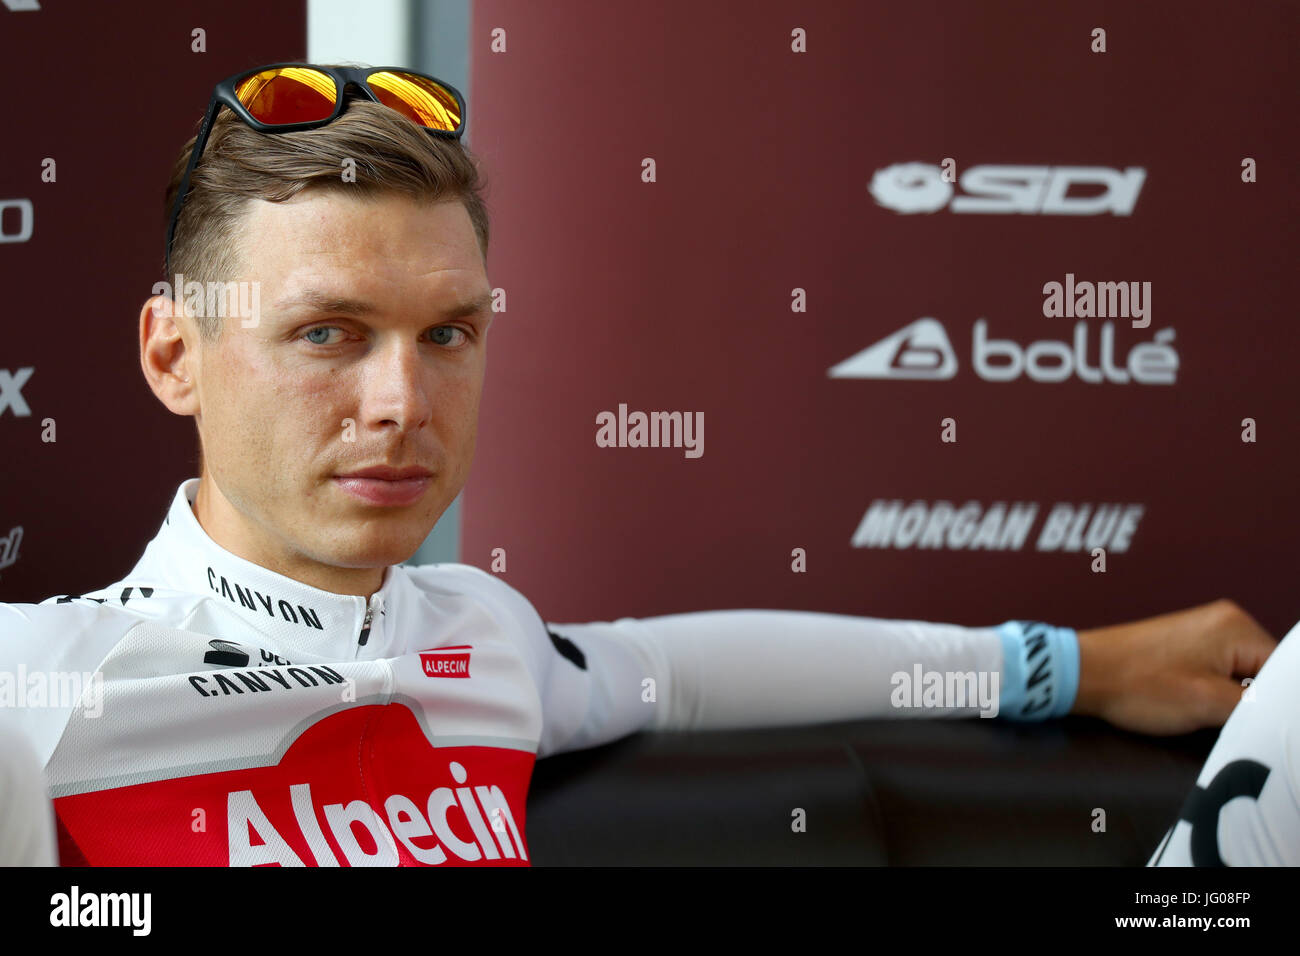 The German cyclist Tony Martin from the Team Katusha Alpecin during a press conference in Duesseldorf, Germany, 28 June 2017. The Tour de France will start of the 1 July in Duesseldorf. Photo: Daniel Karmann/dpa Stock Photo